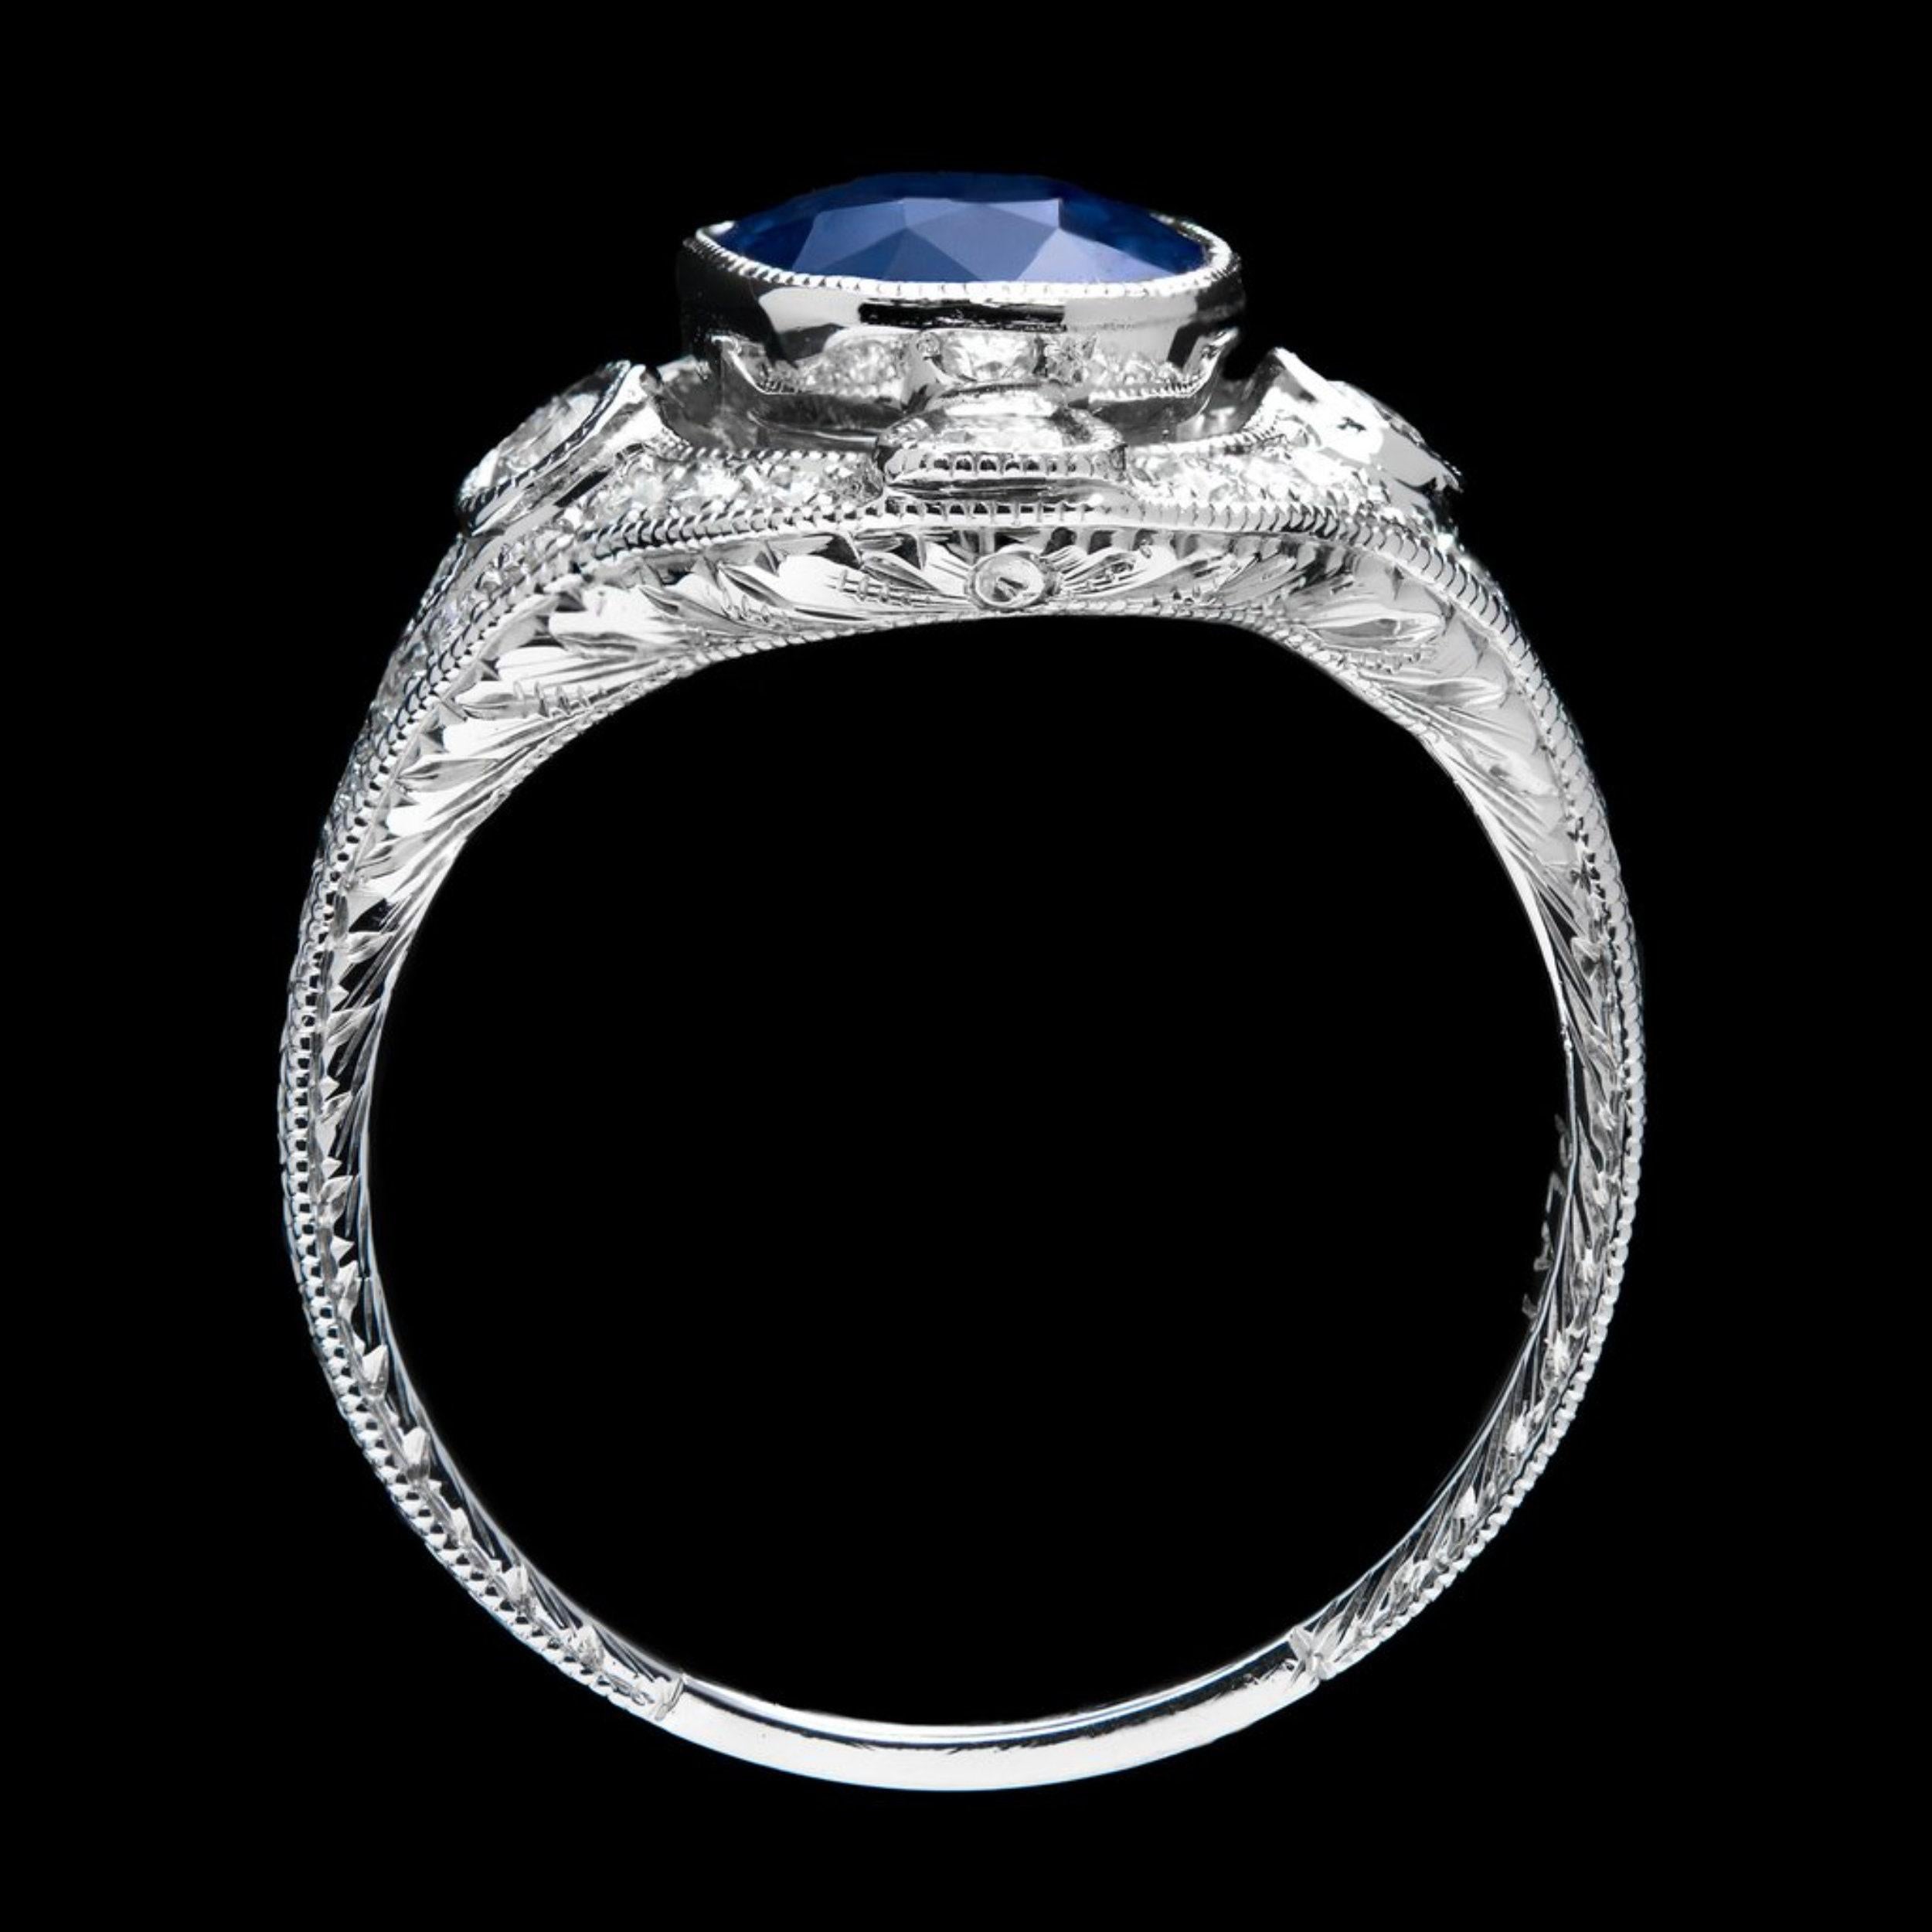 For Sale:  4 Carat Oval Cut Sapphire Diamond Engagement Ring, Blue Sapphire Wedding Ring 2